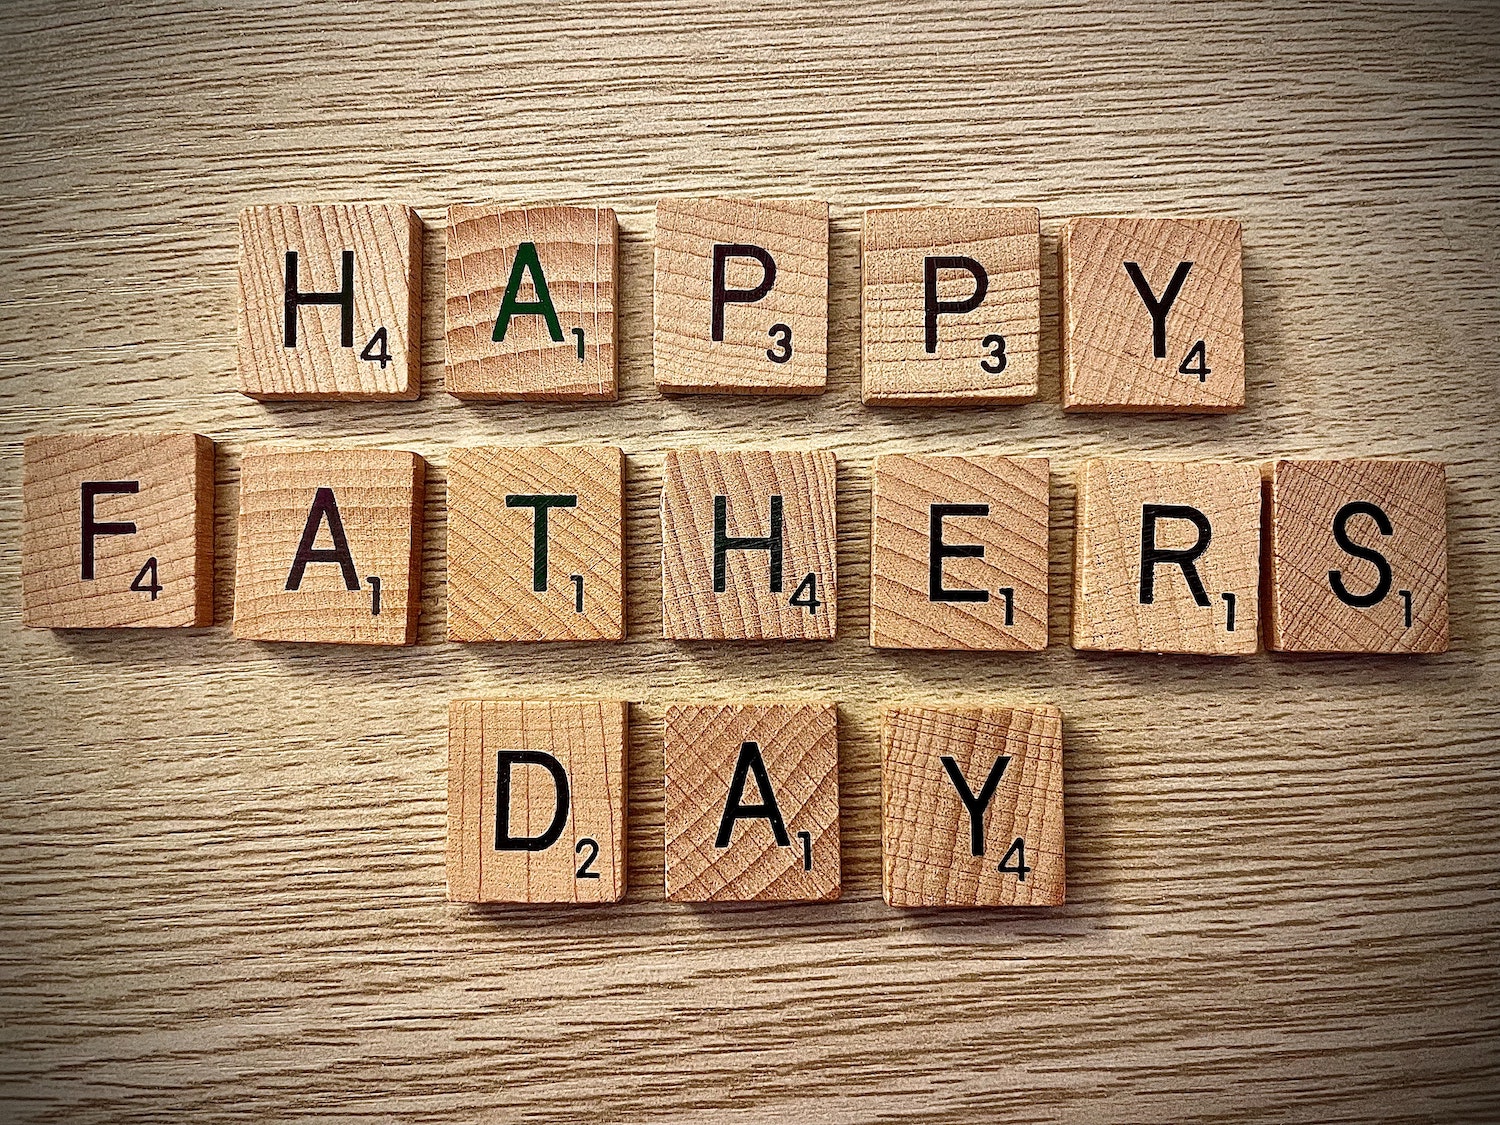 Why is father's Day in June in Ireland?